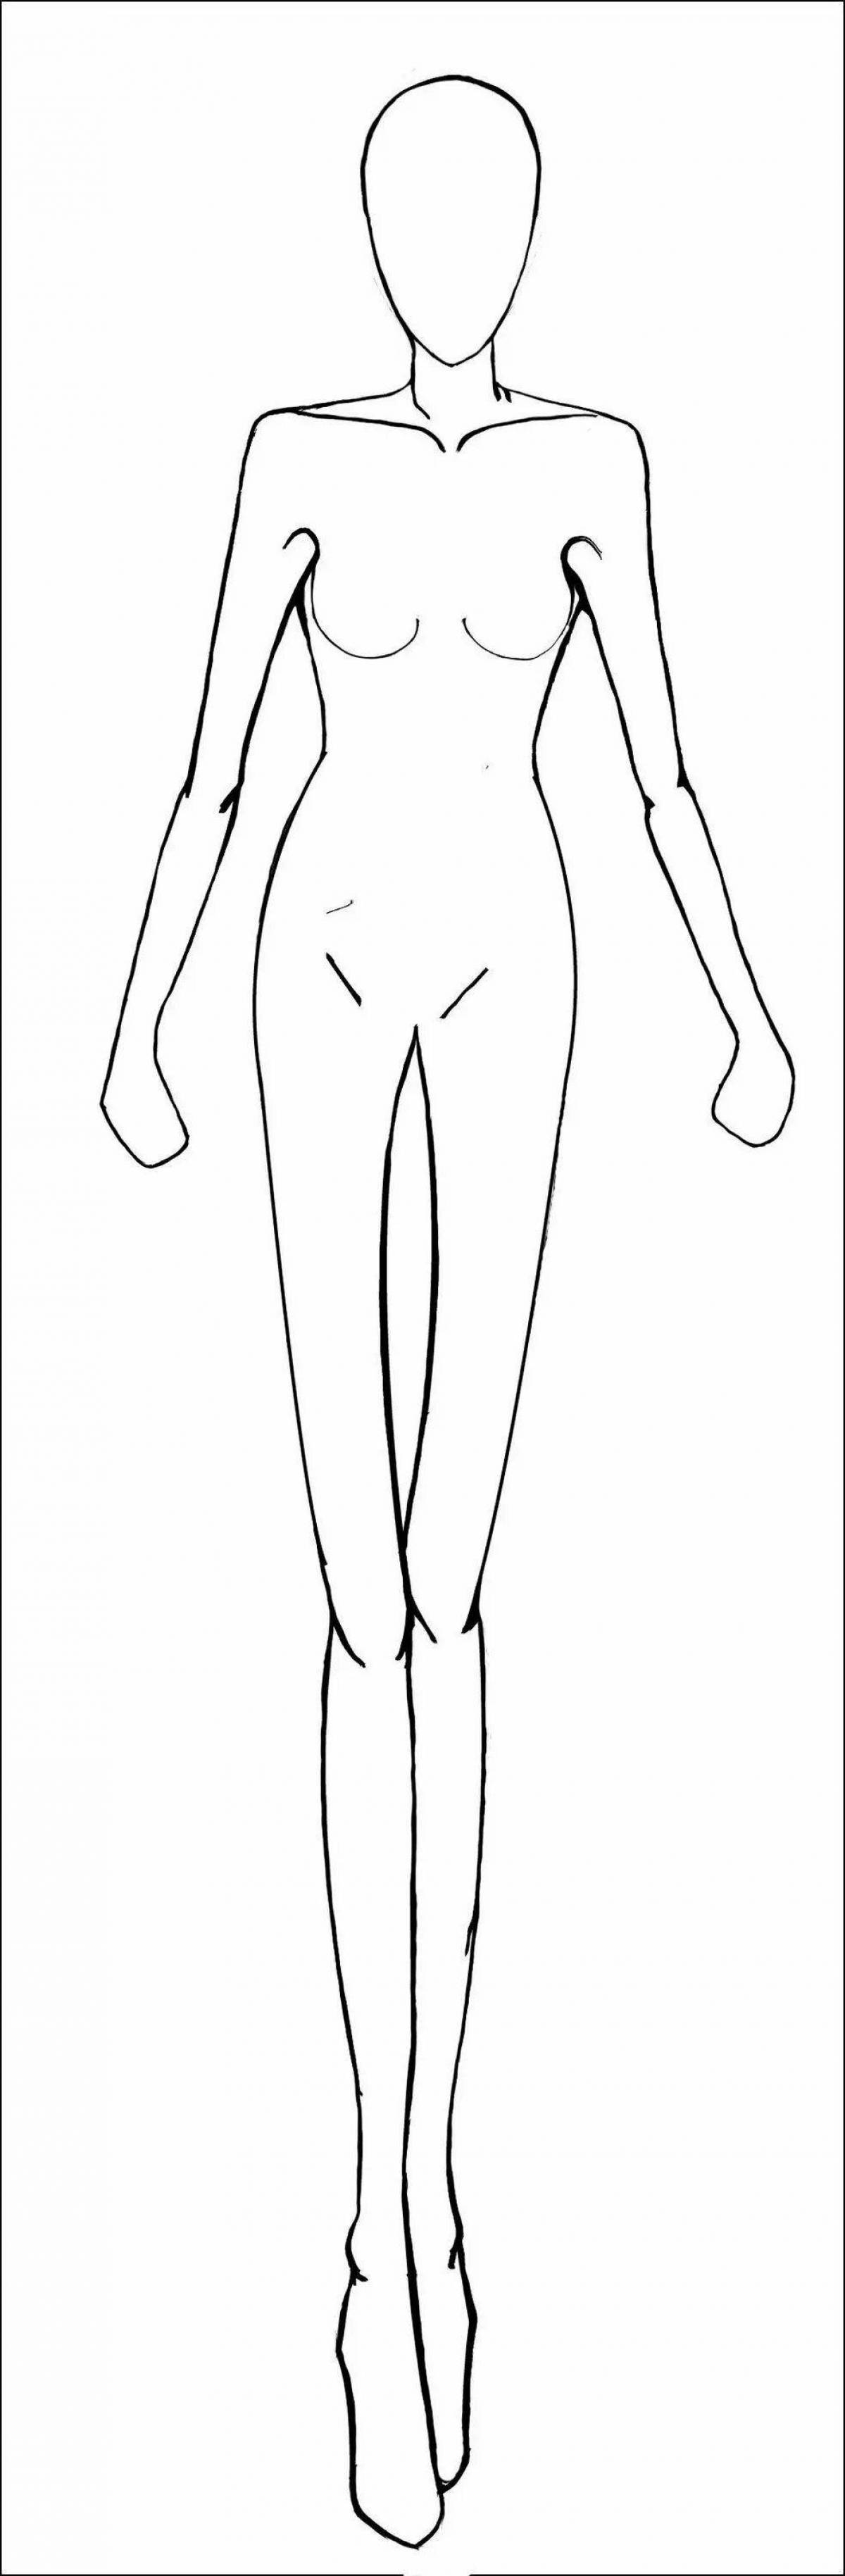 Coloring page energetic female mannequin